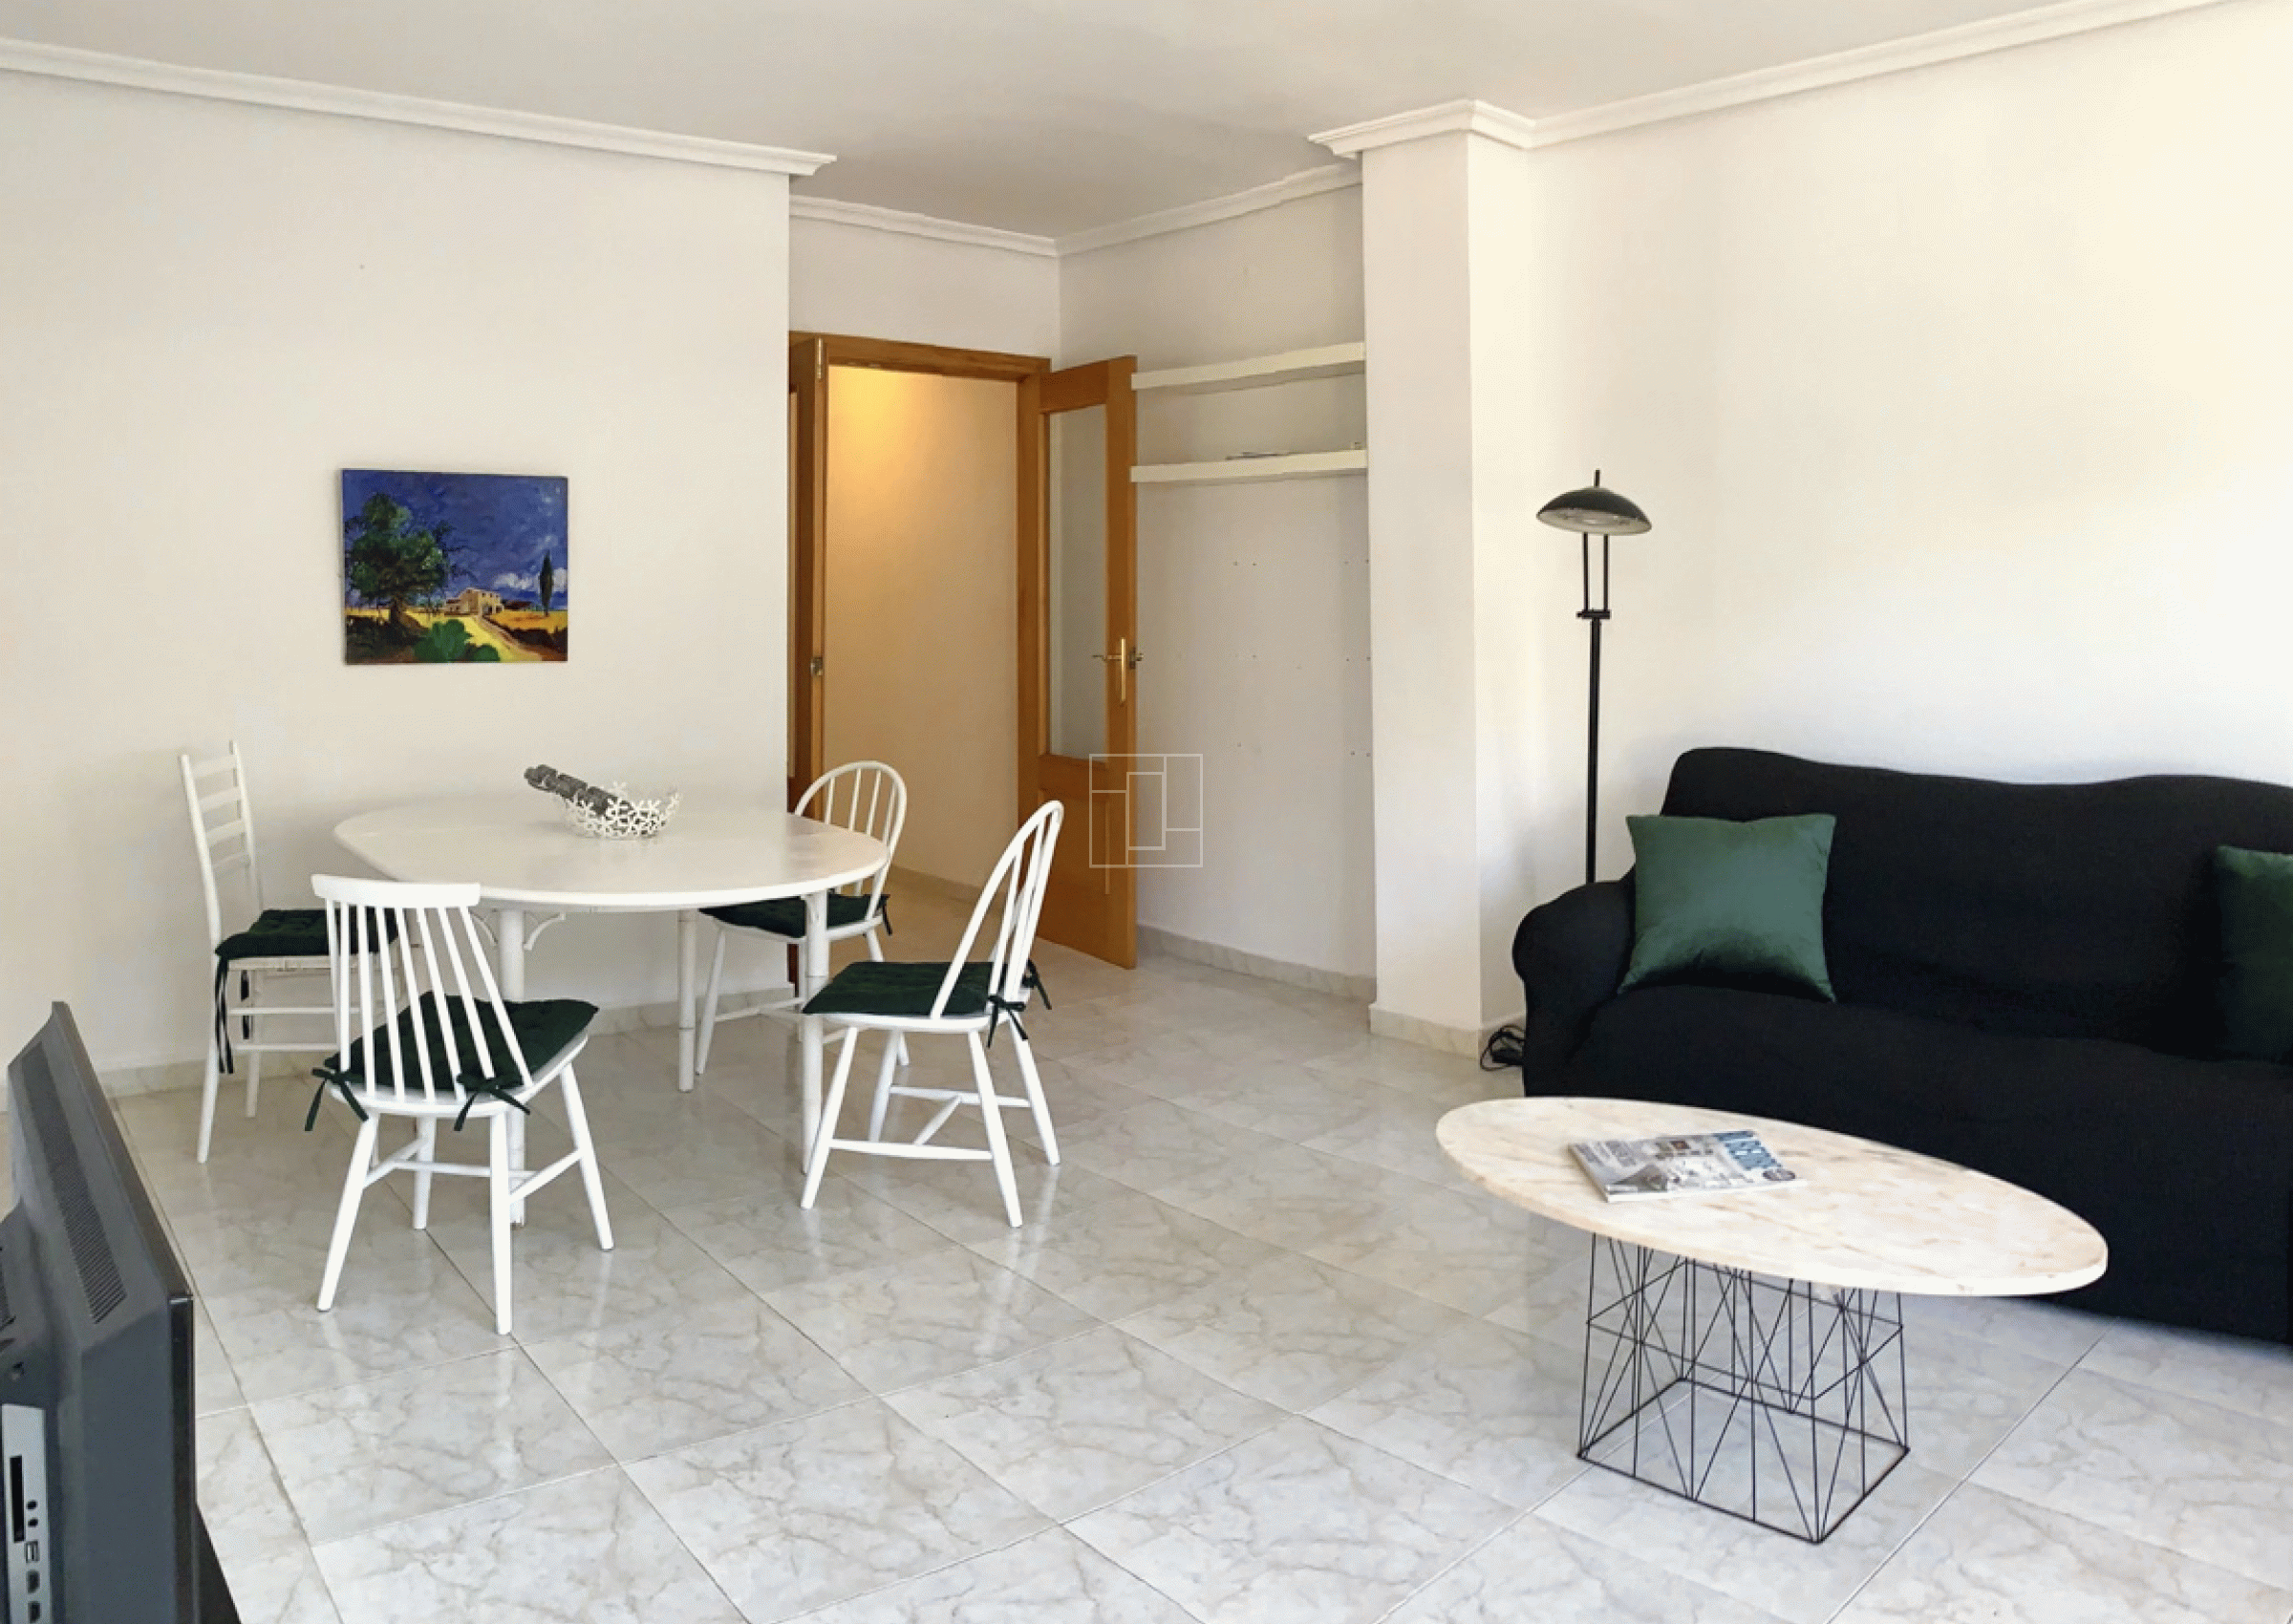 Apartment with sea views in the port of Javea
bp